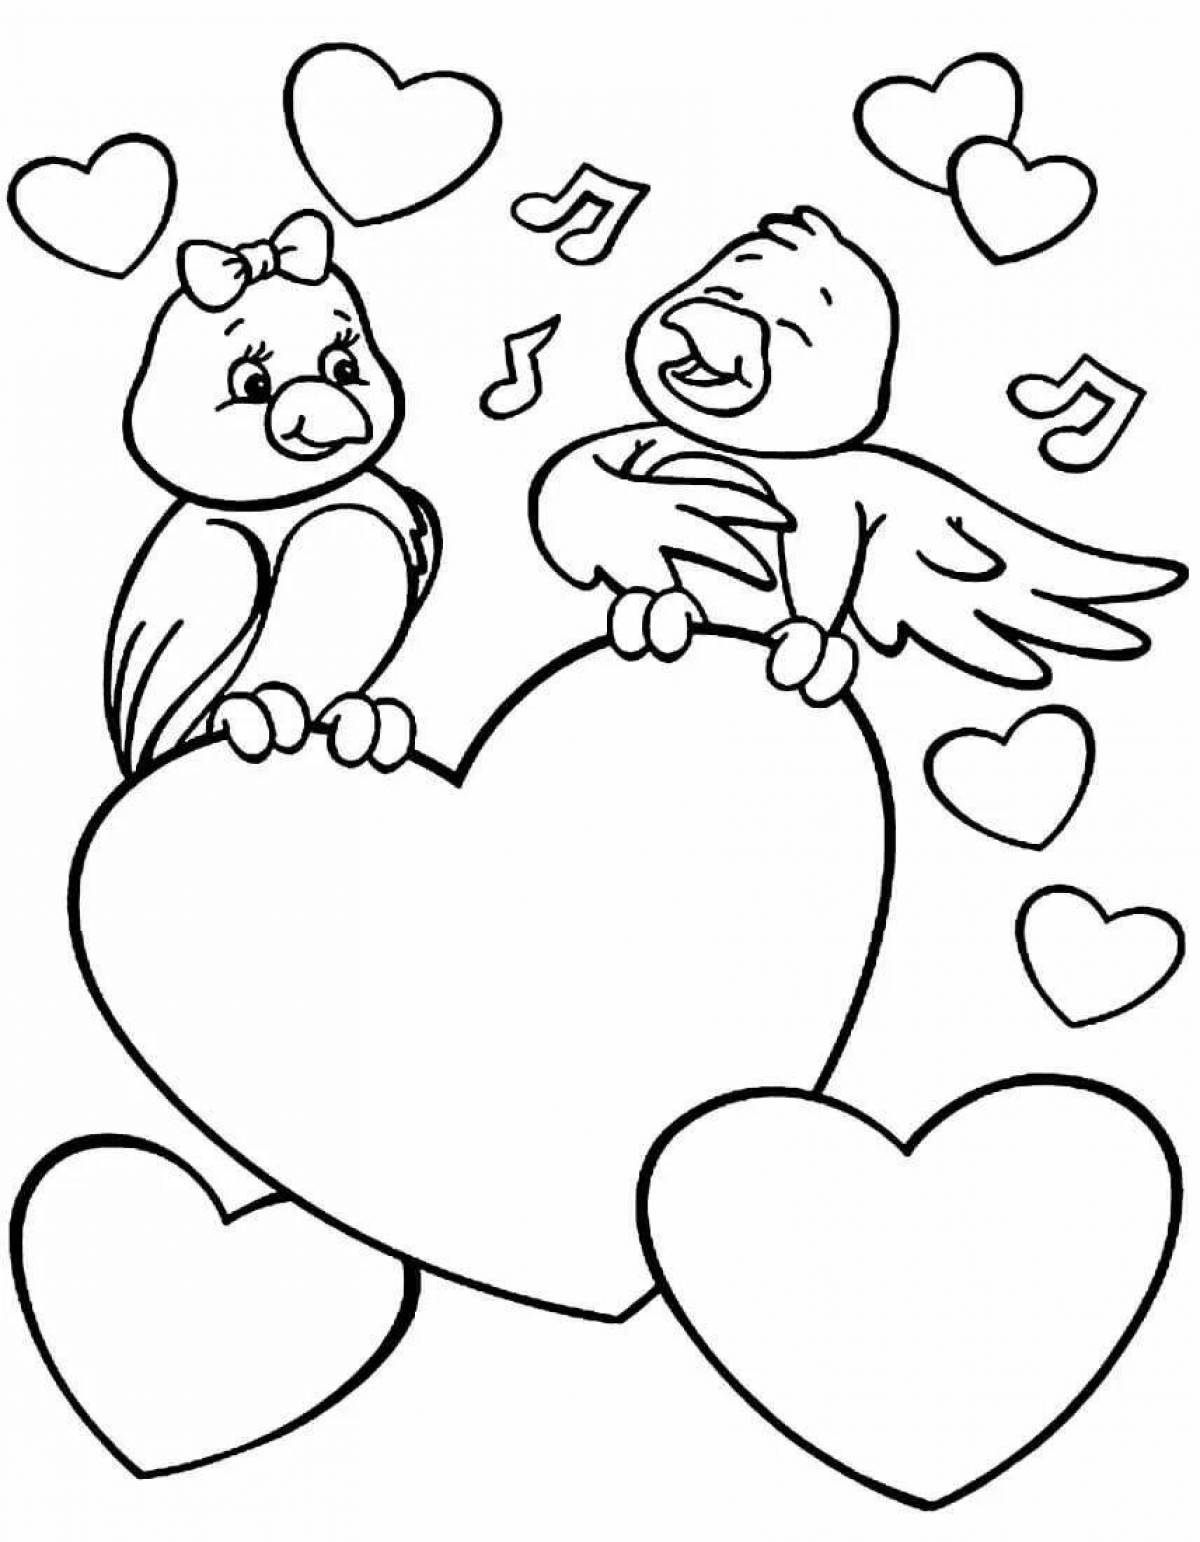 Lovely valentines day coloring page